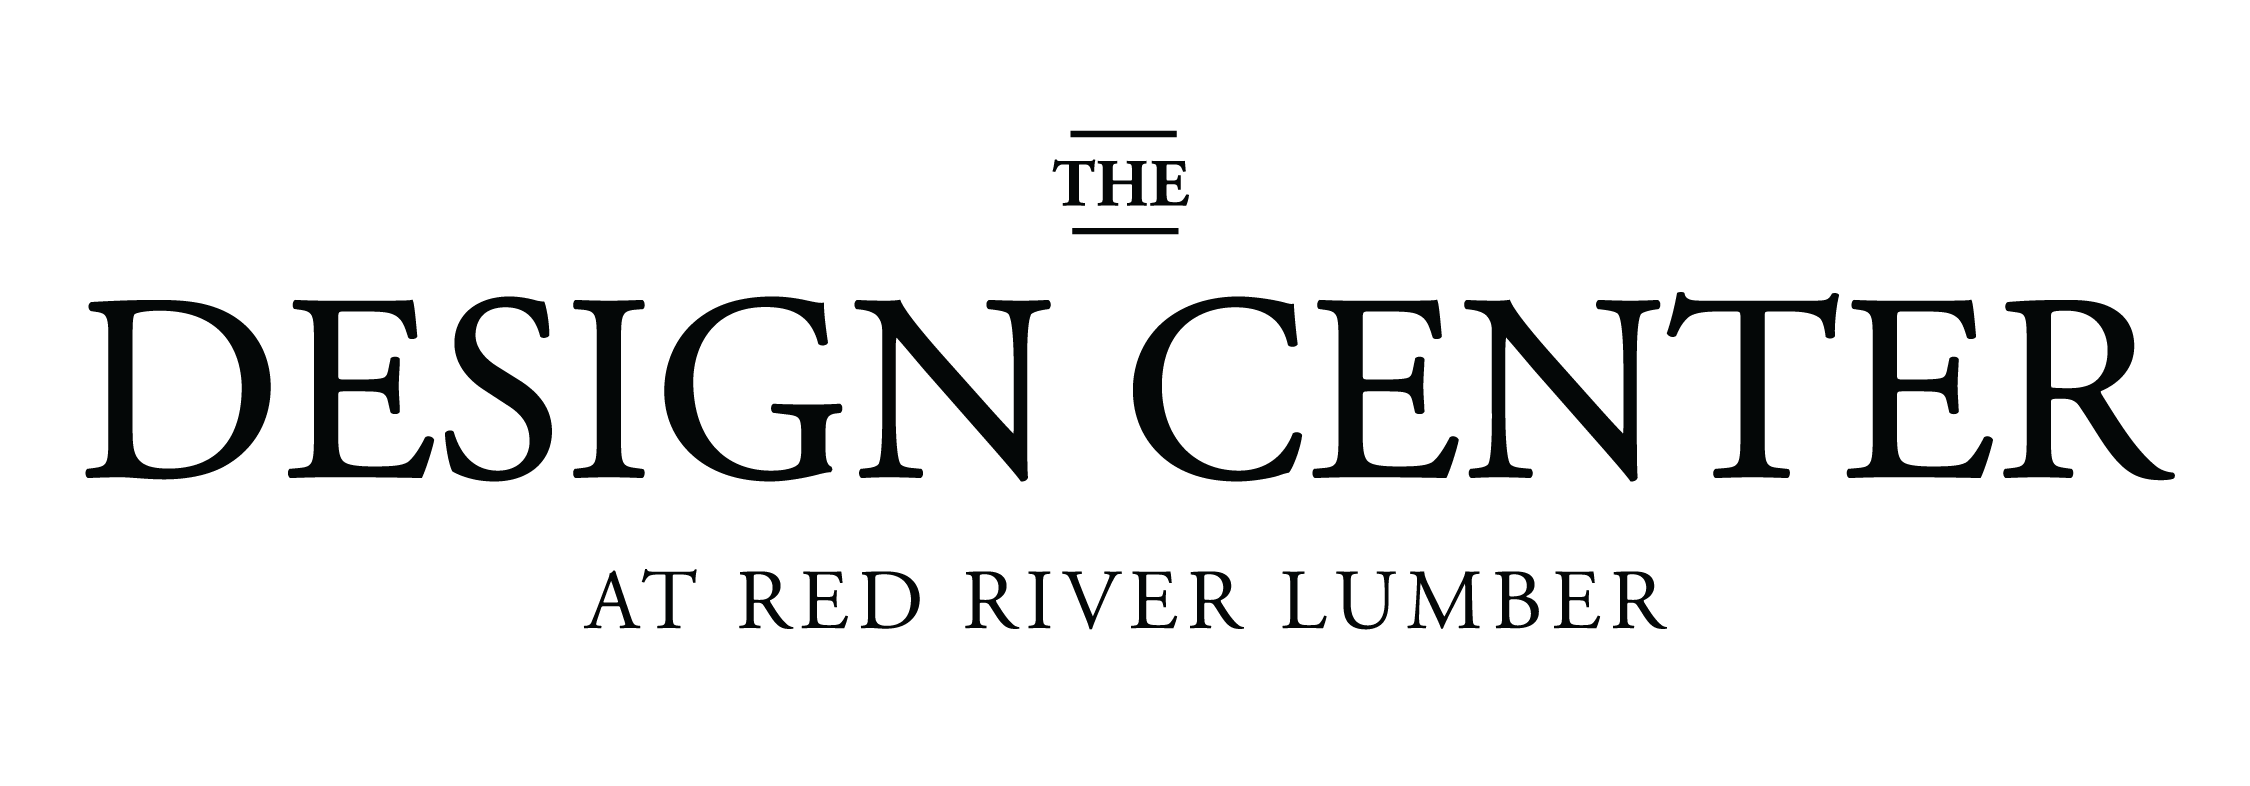 Red River Lumber and Family of Companies Logo